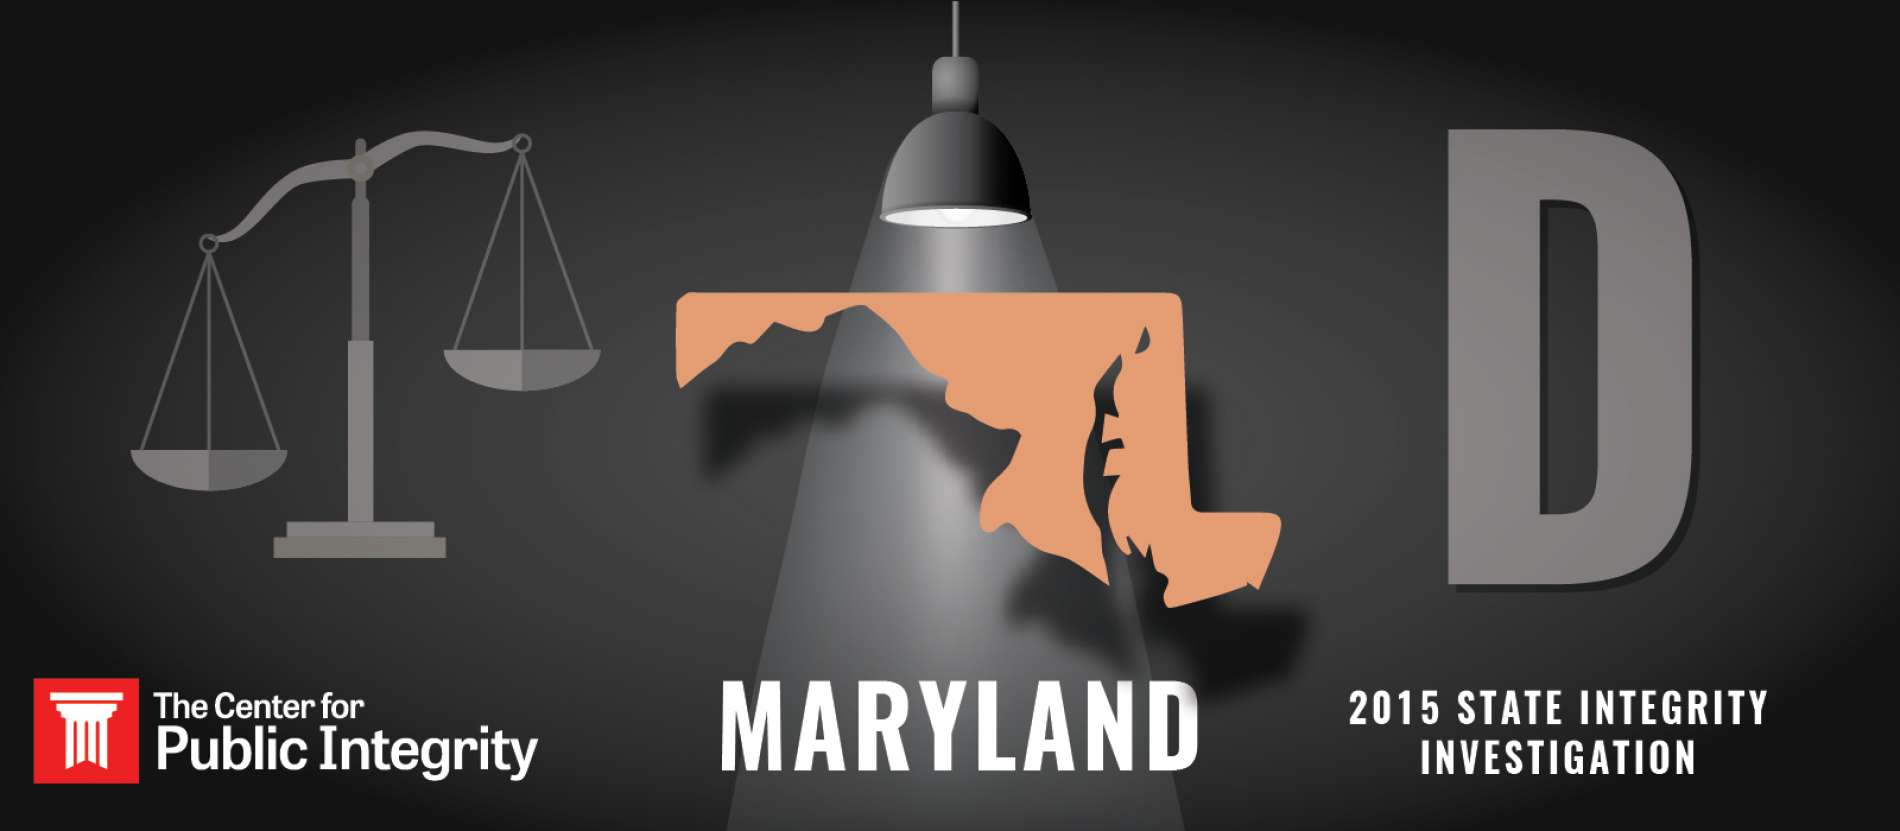 Maryland gets D grade in 2015 State Integrity Investigation